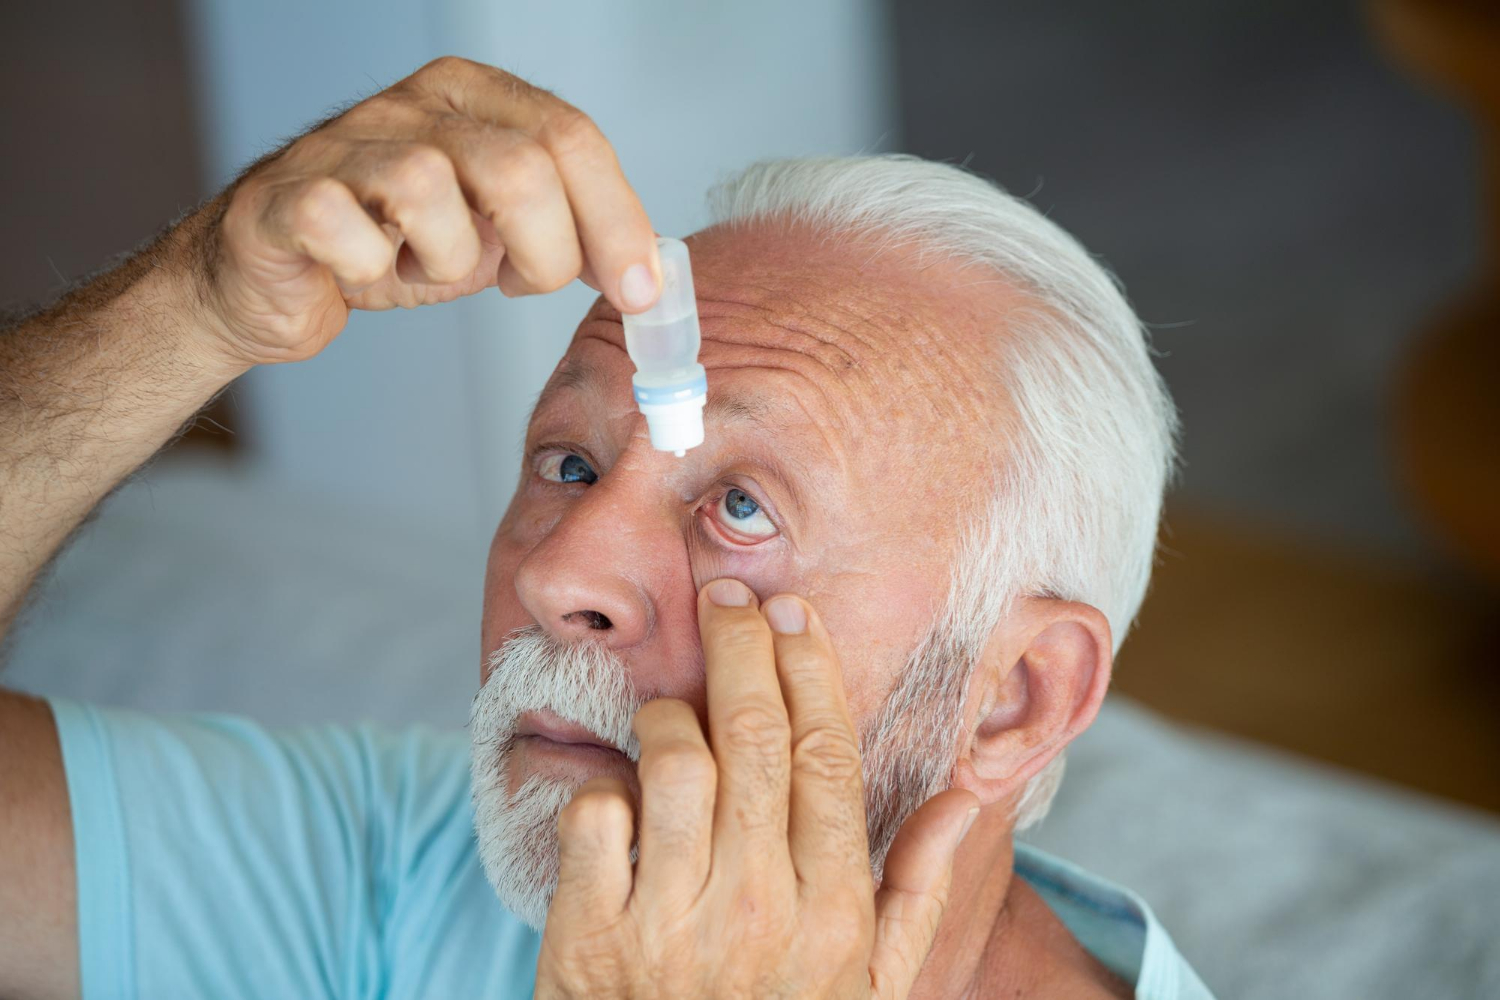 using artificial tears for dry eye after cataract surgery